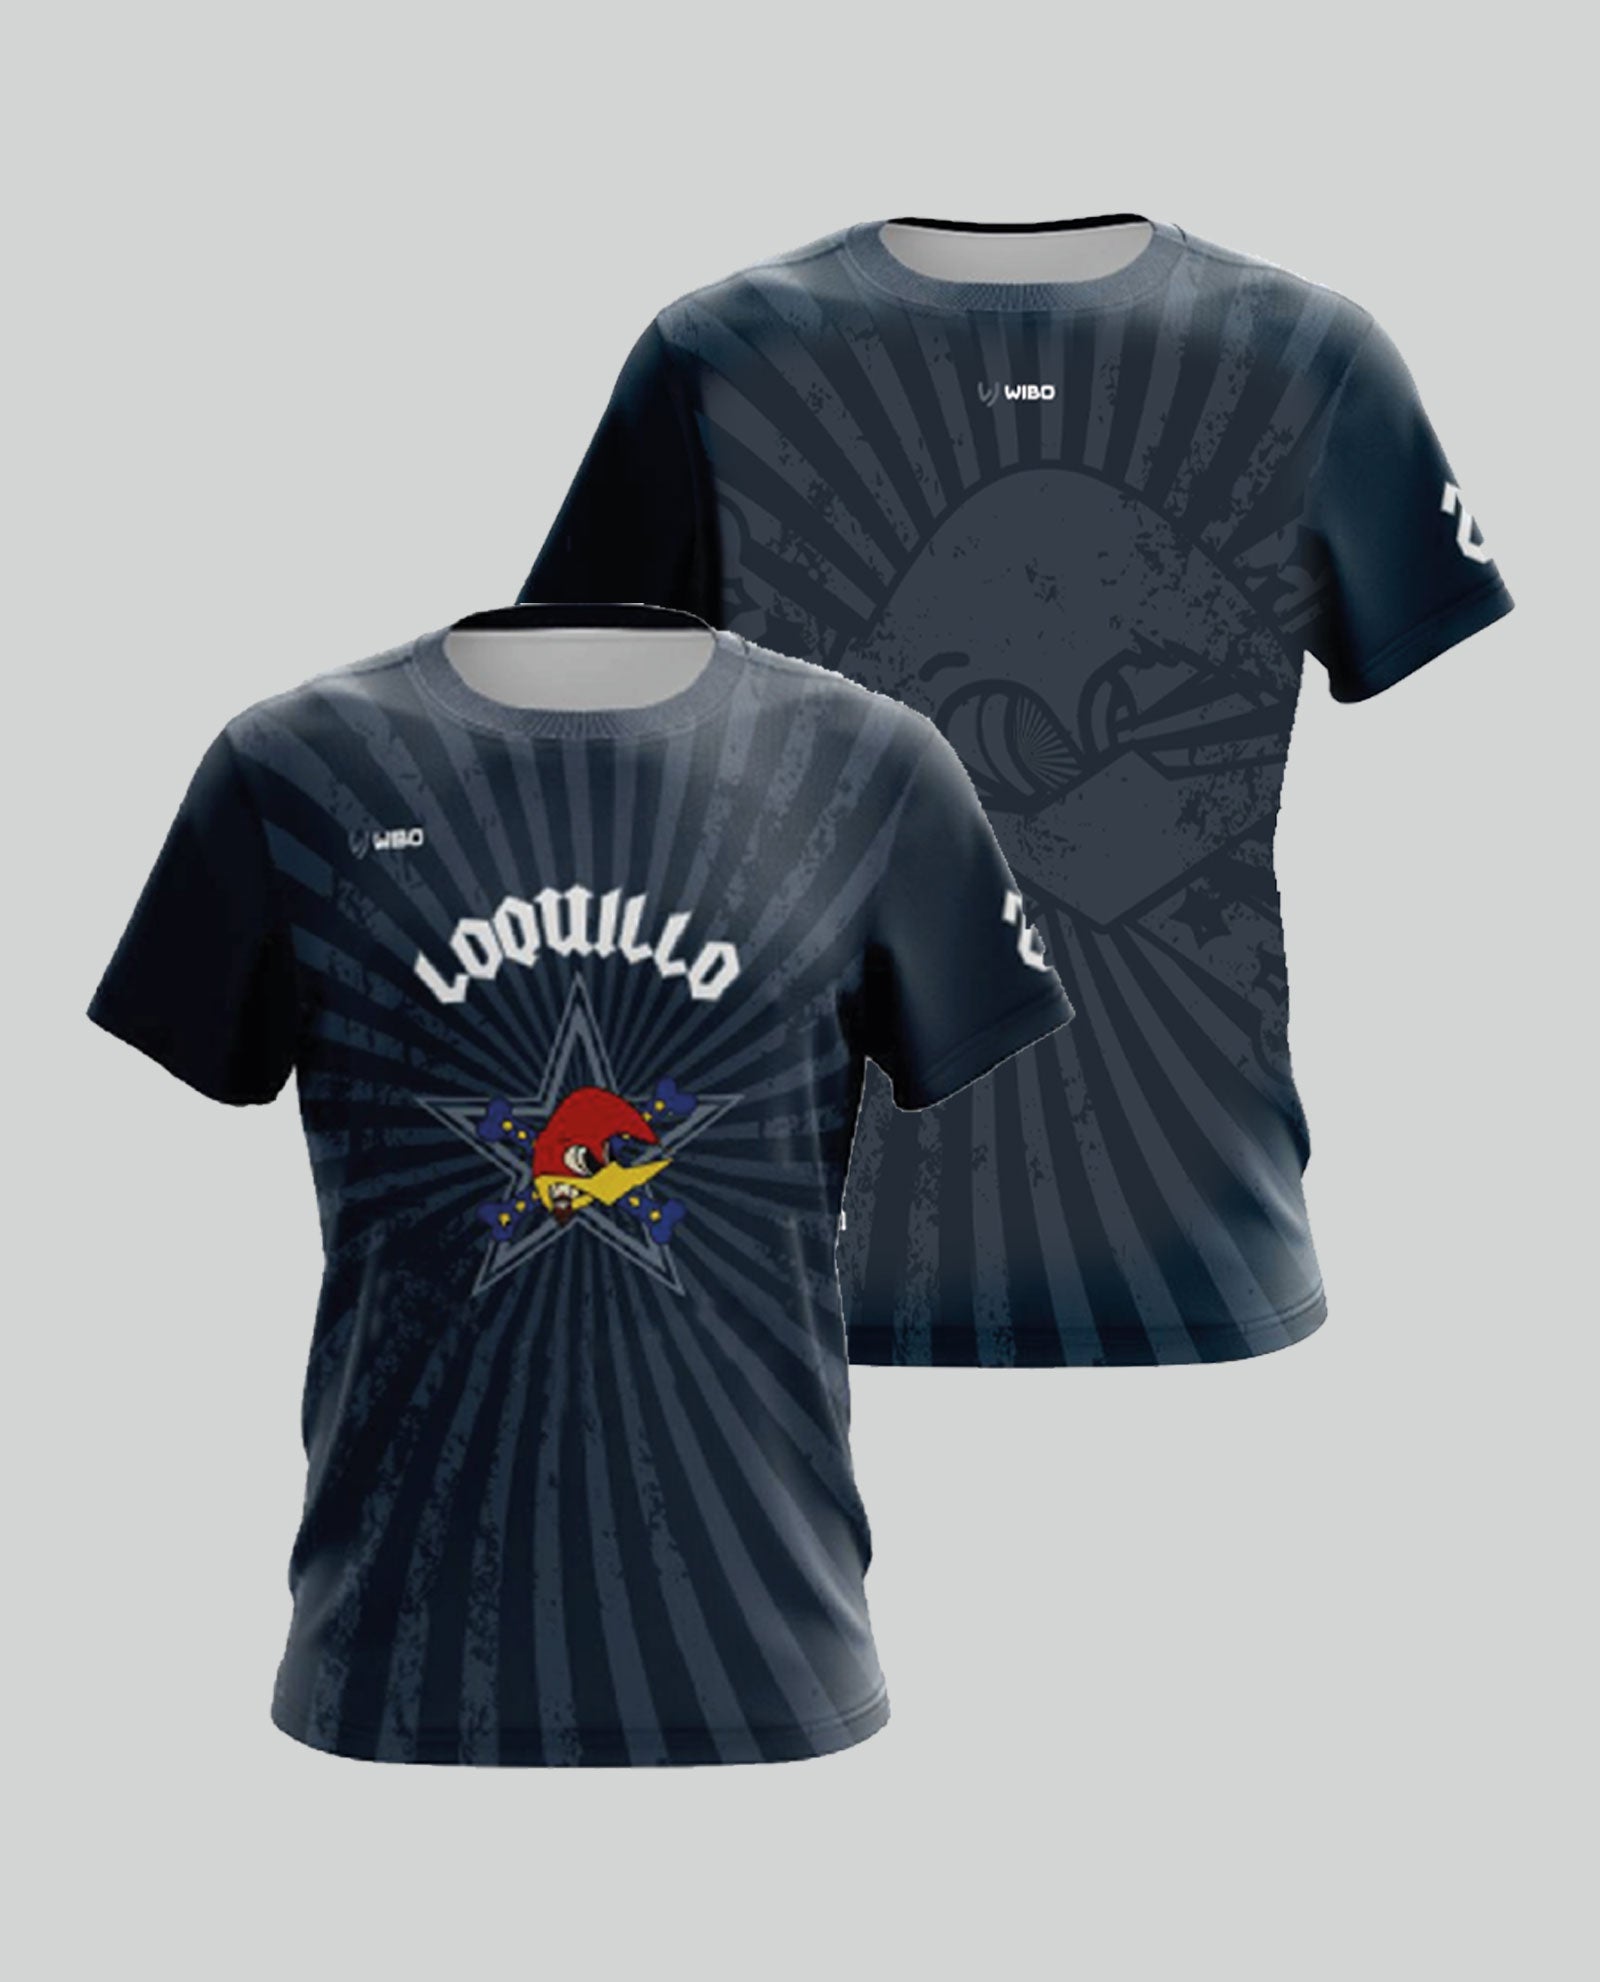 Loquillo - Camiseta Deportiva Hombre R'n'R Star